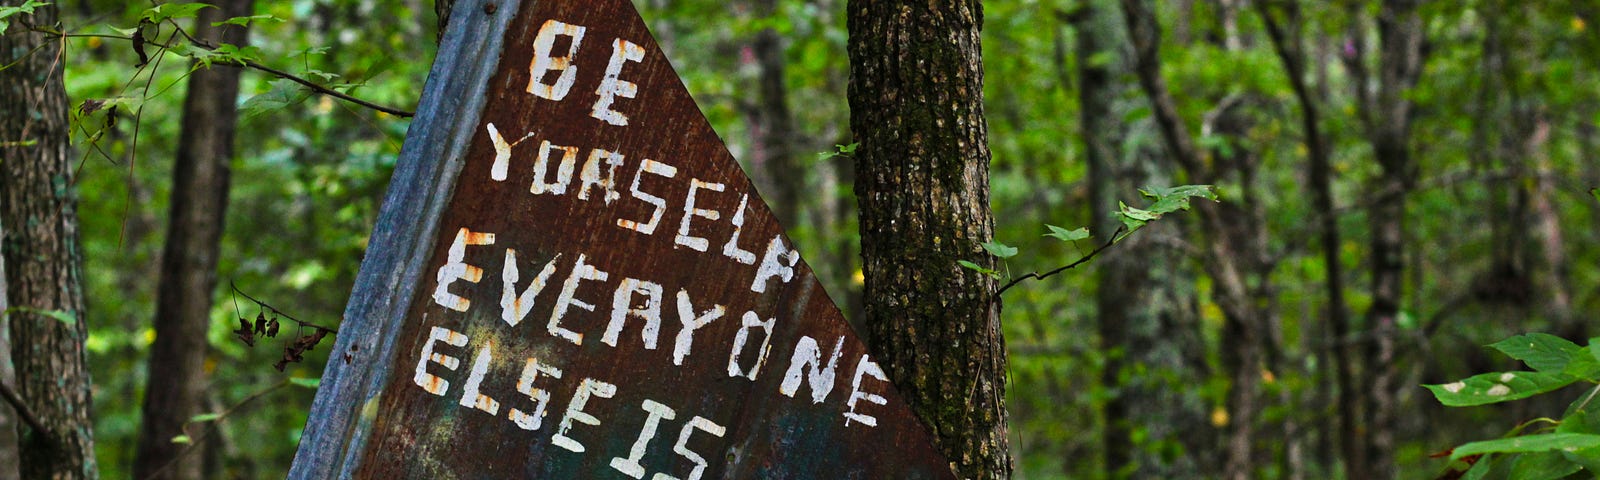 A sign in the woods of the famous Oscar Wilde Quote of “Be Yourself, Everyone Else Is Taken”